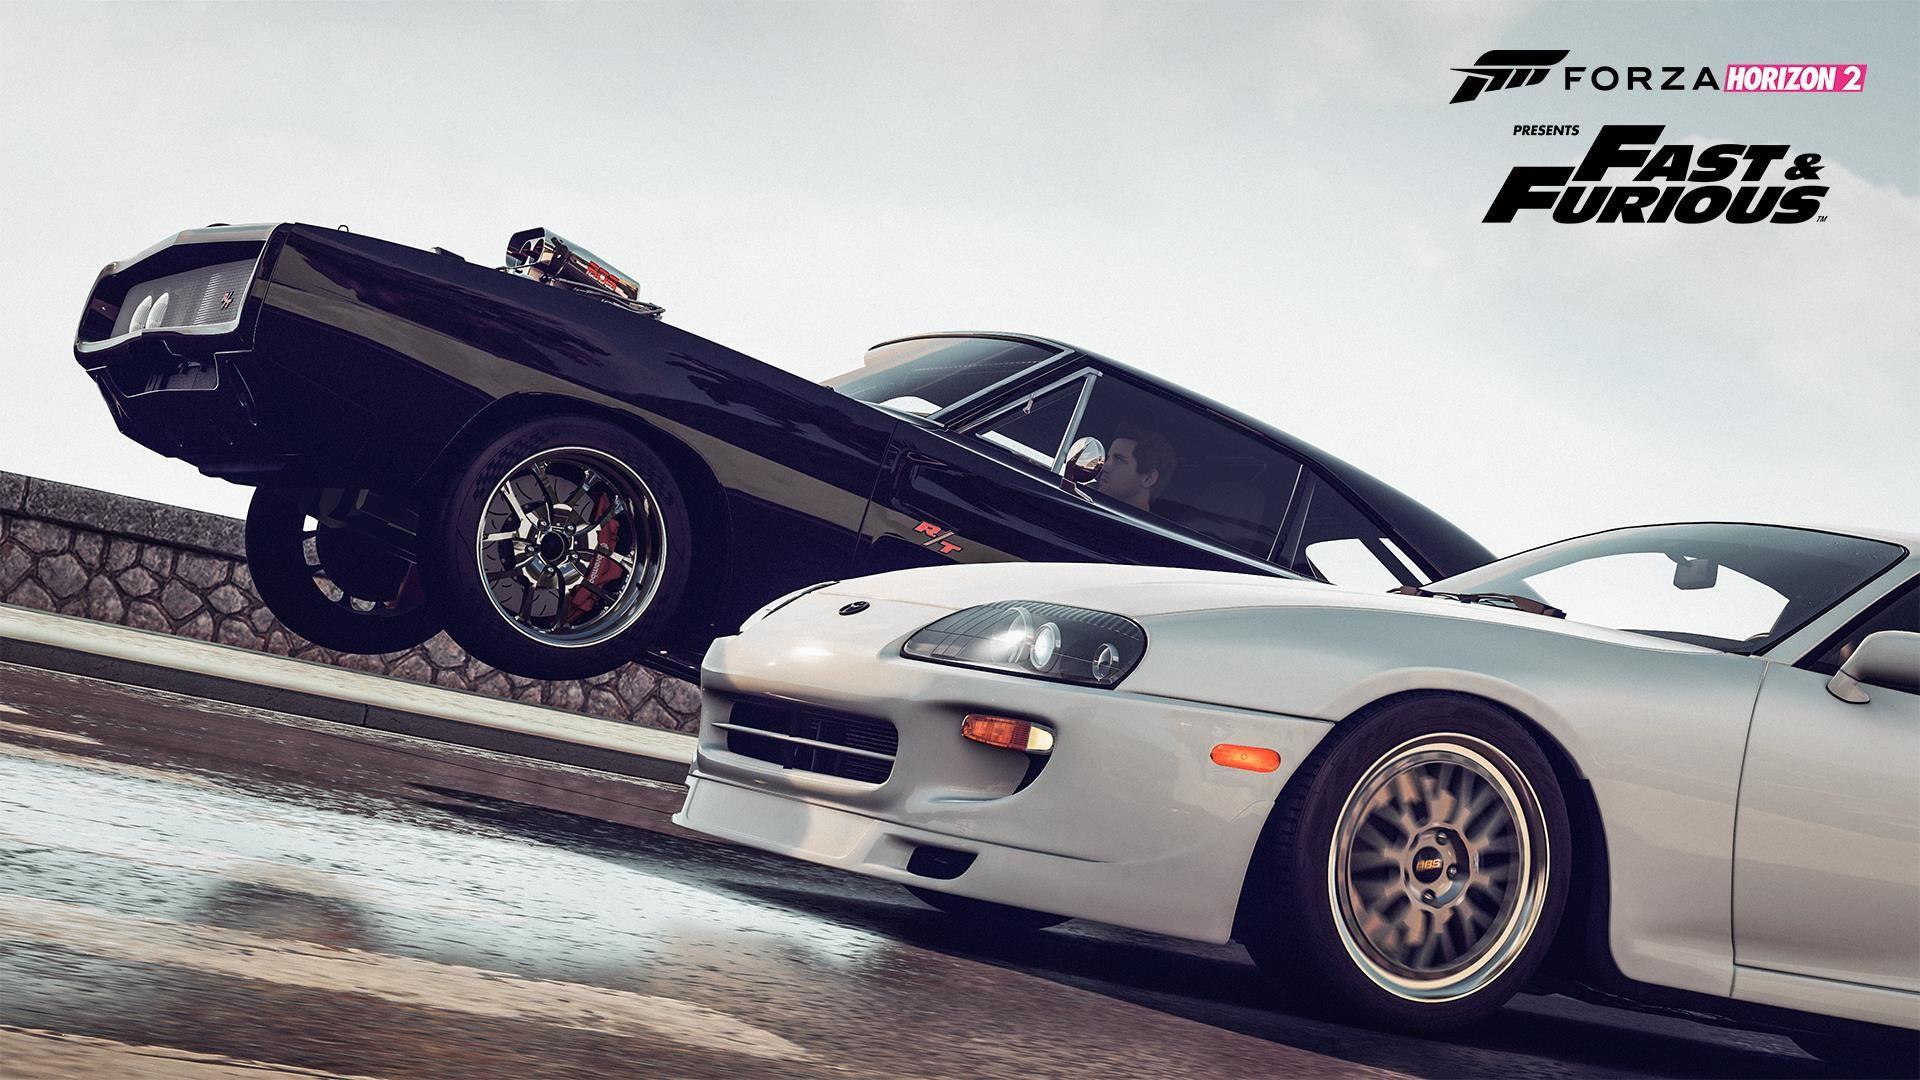 Today's the last day to get the Fast & Furious expansion for Forza